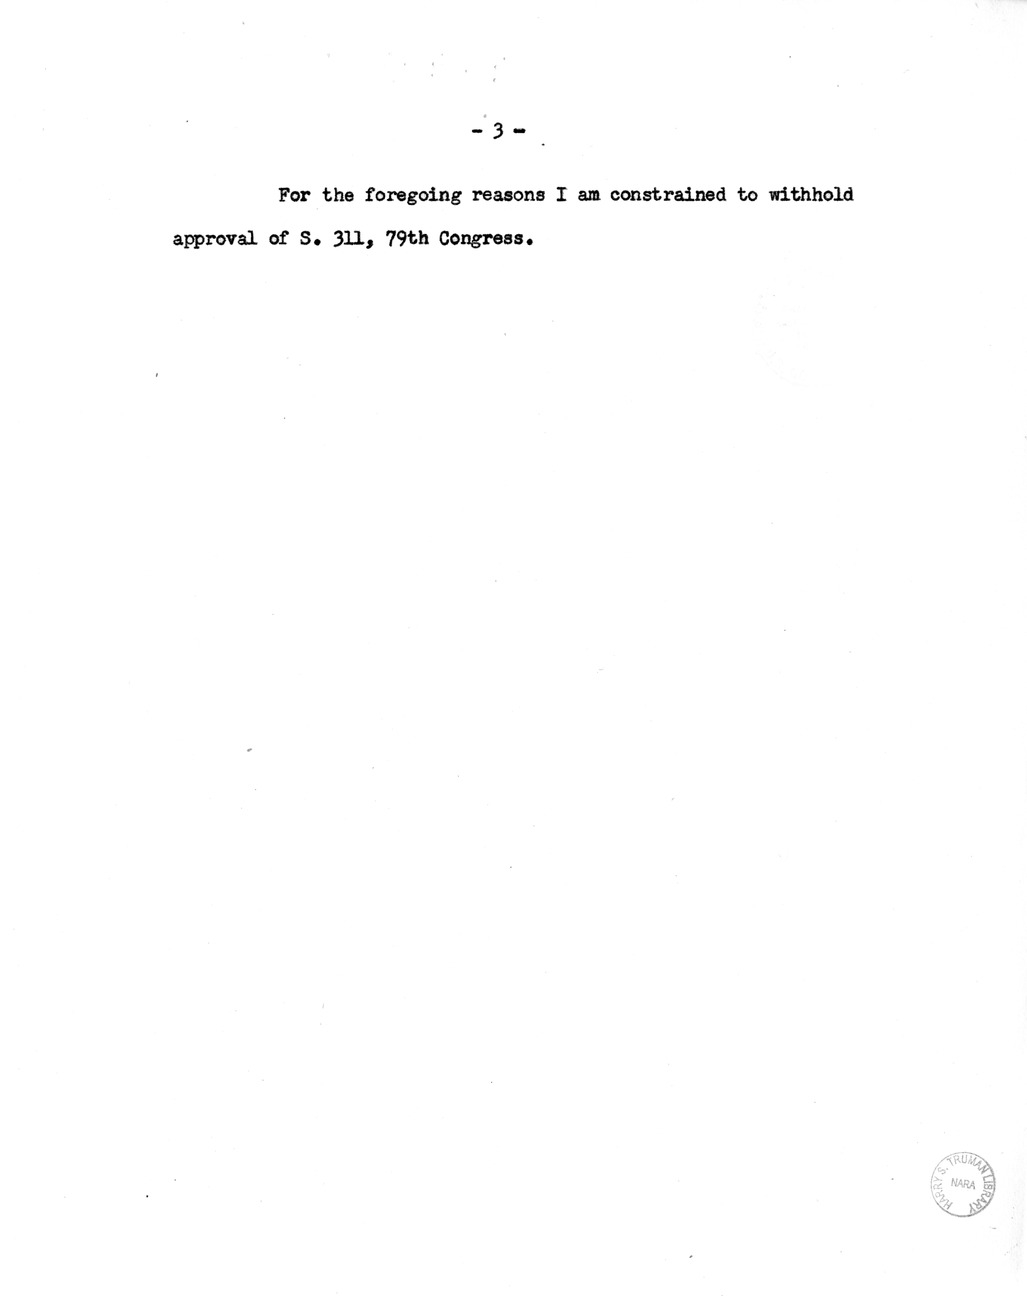 Memorandum from Frederick Bailey to M. C. Latta, S. 311, For the Relief of Philip Kleinman, with Attachments